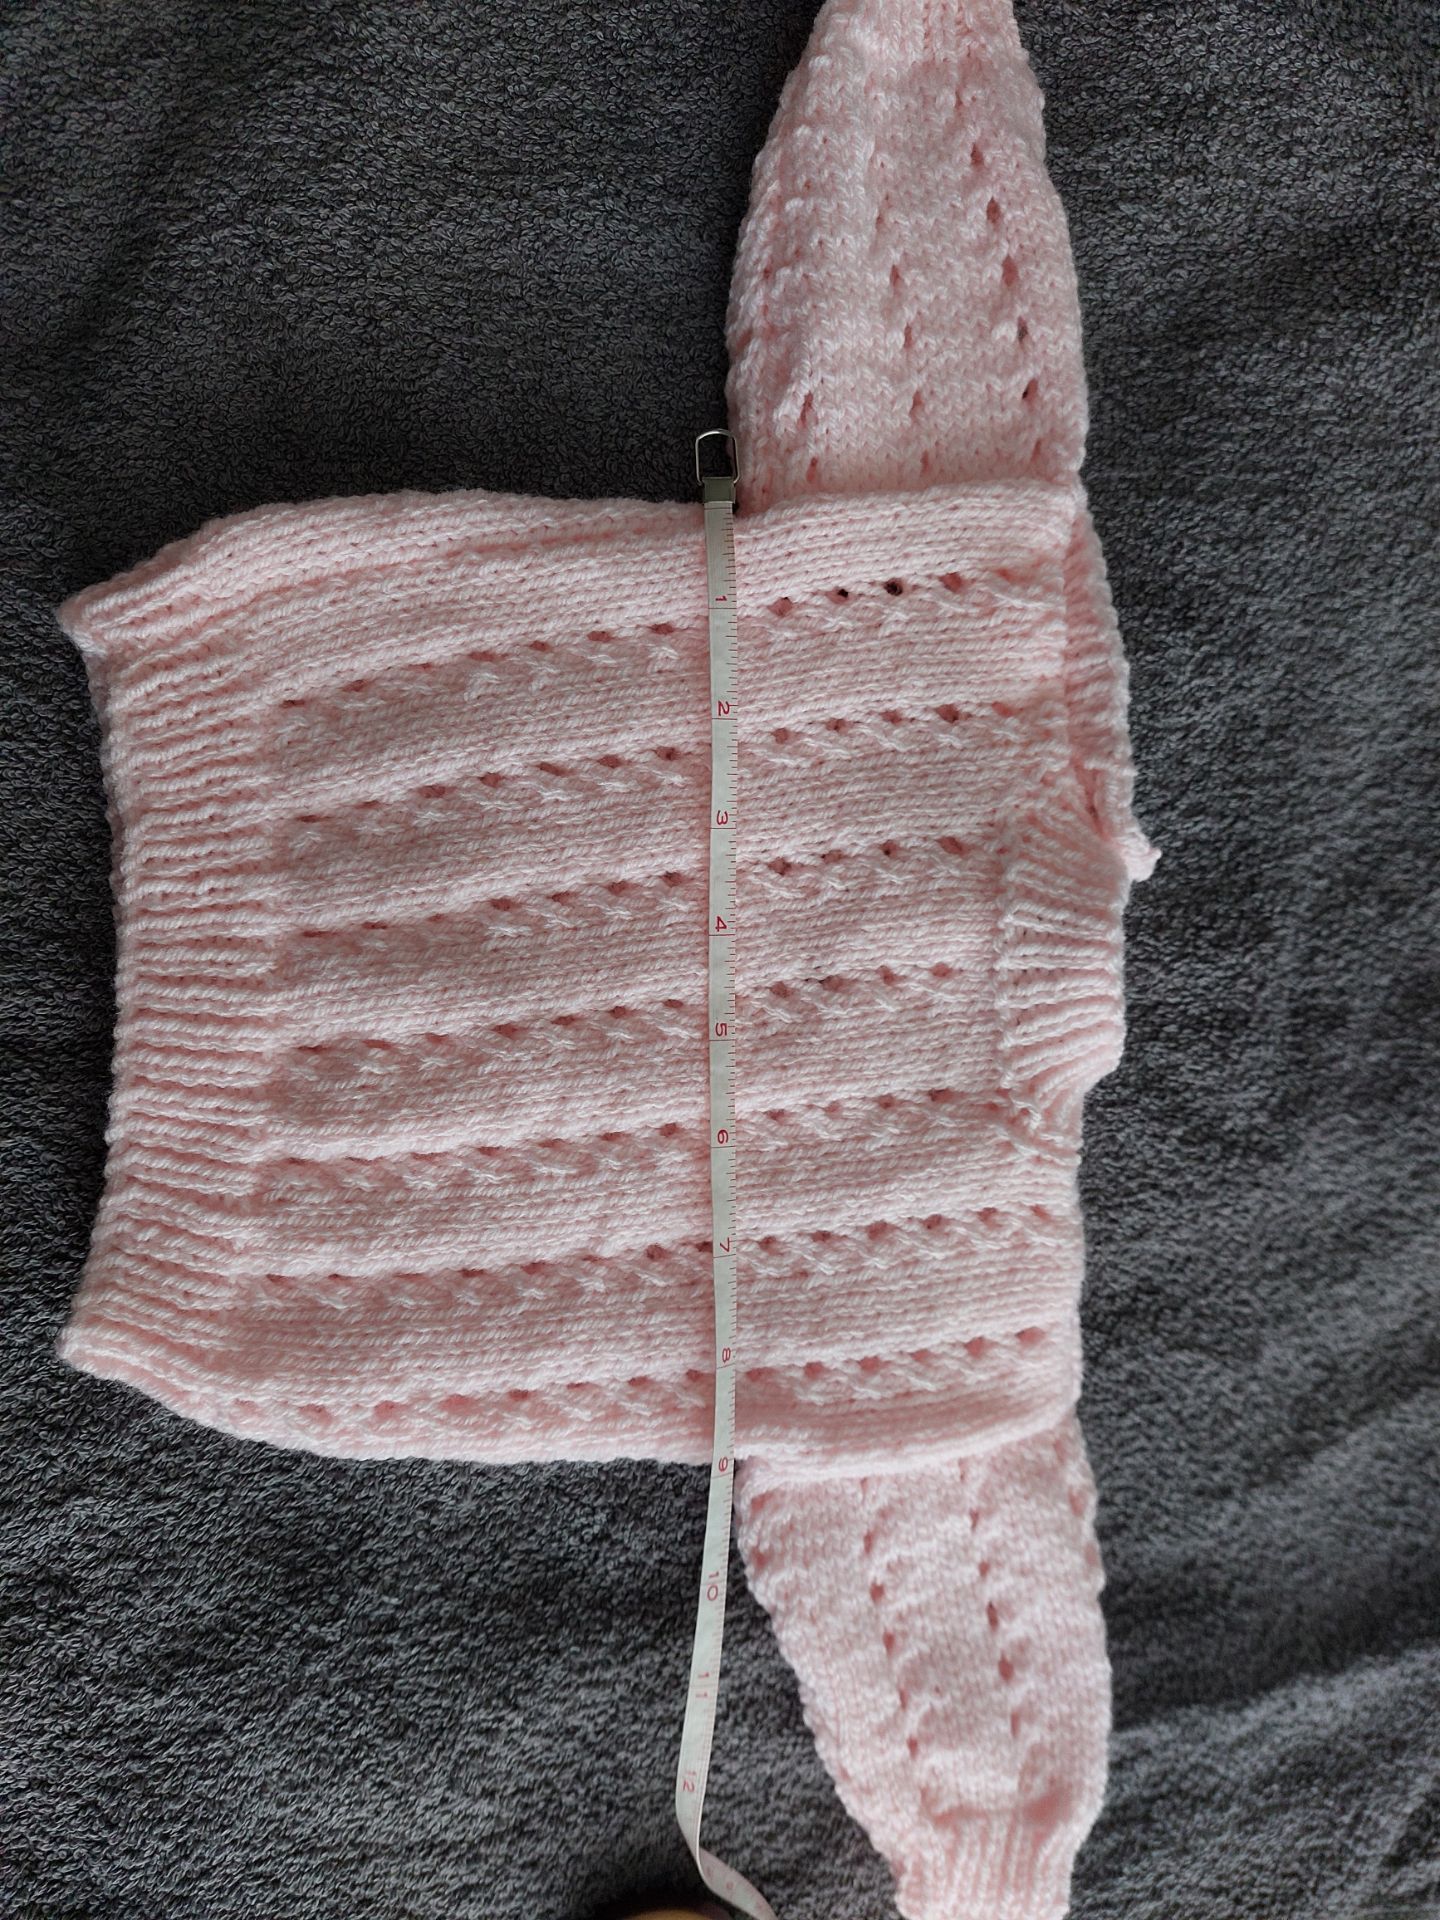 Hand Knitted Jumper Baby - Image 2 of 4